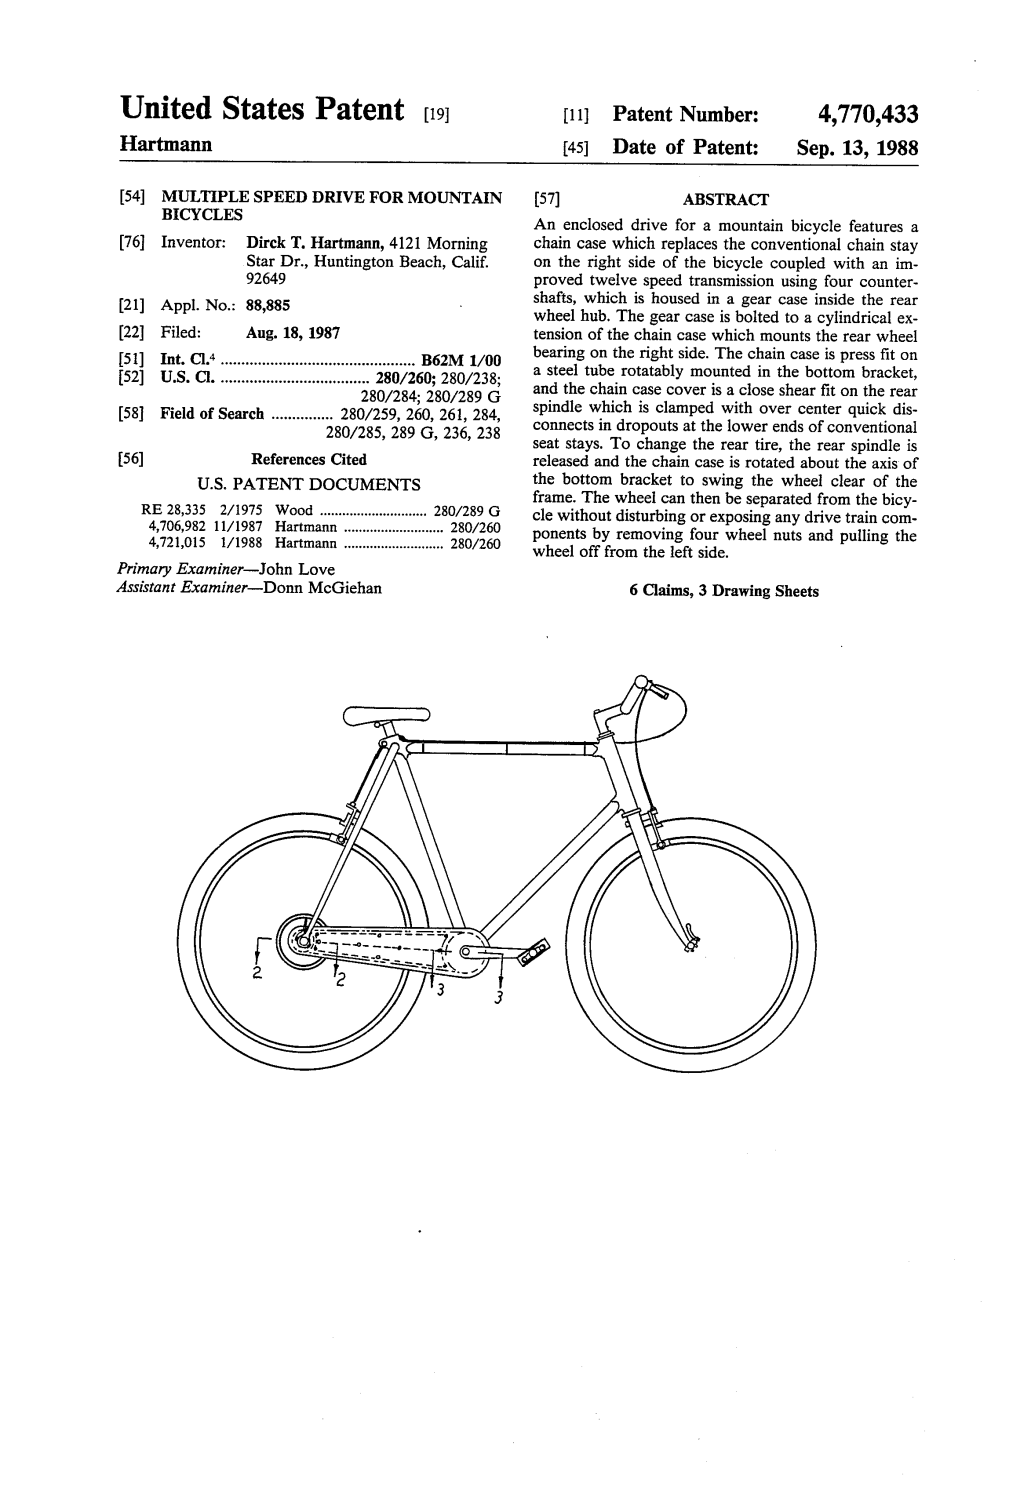 United States Patent (19) 11 Patent Number: 4,770,433 Hartmann 45 Date of Patent: Sep